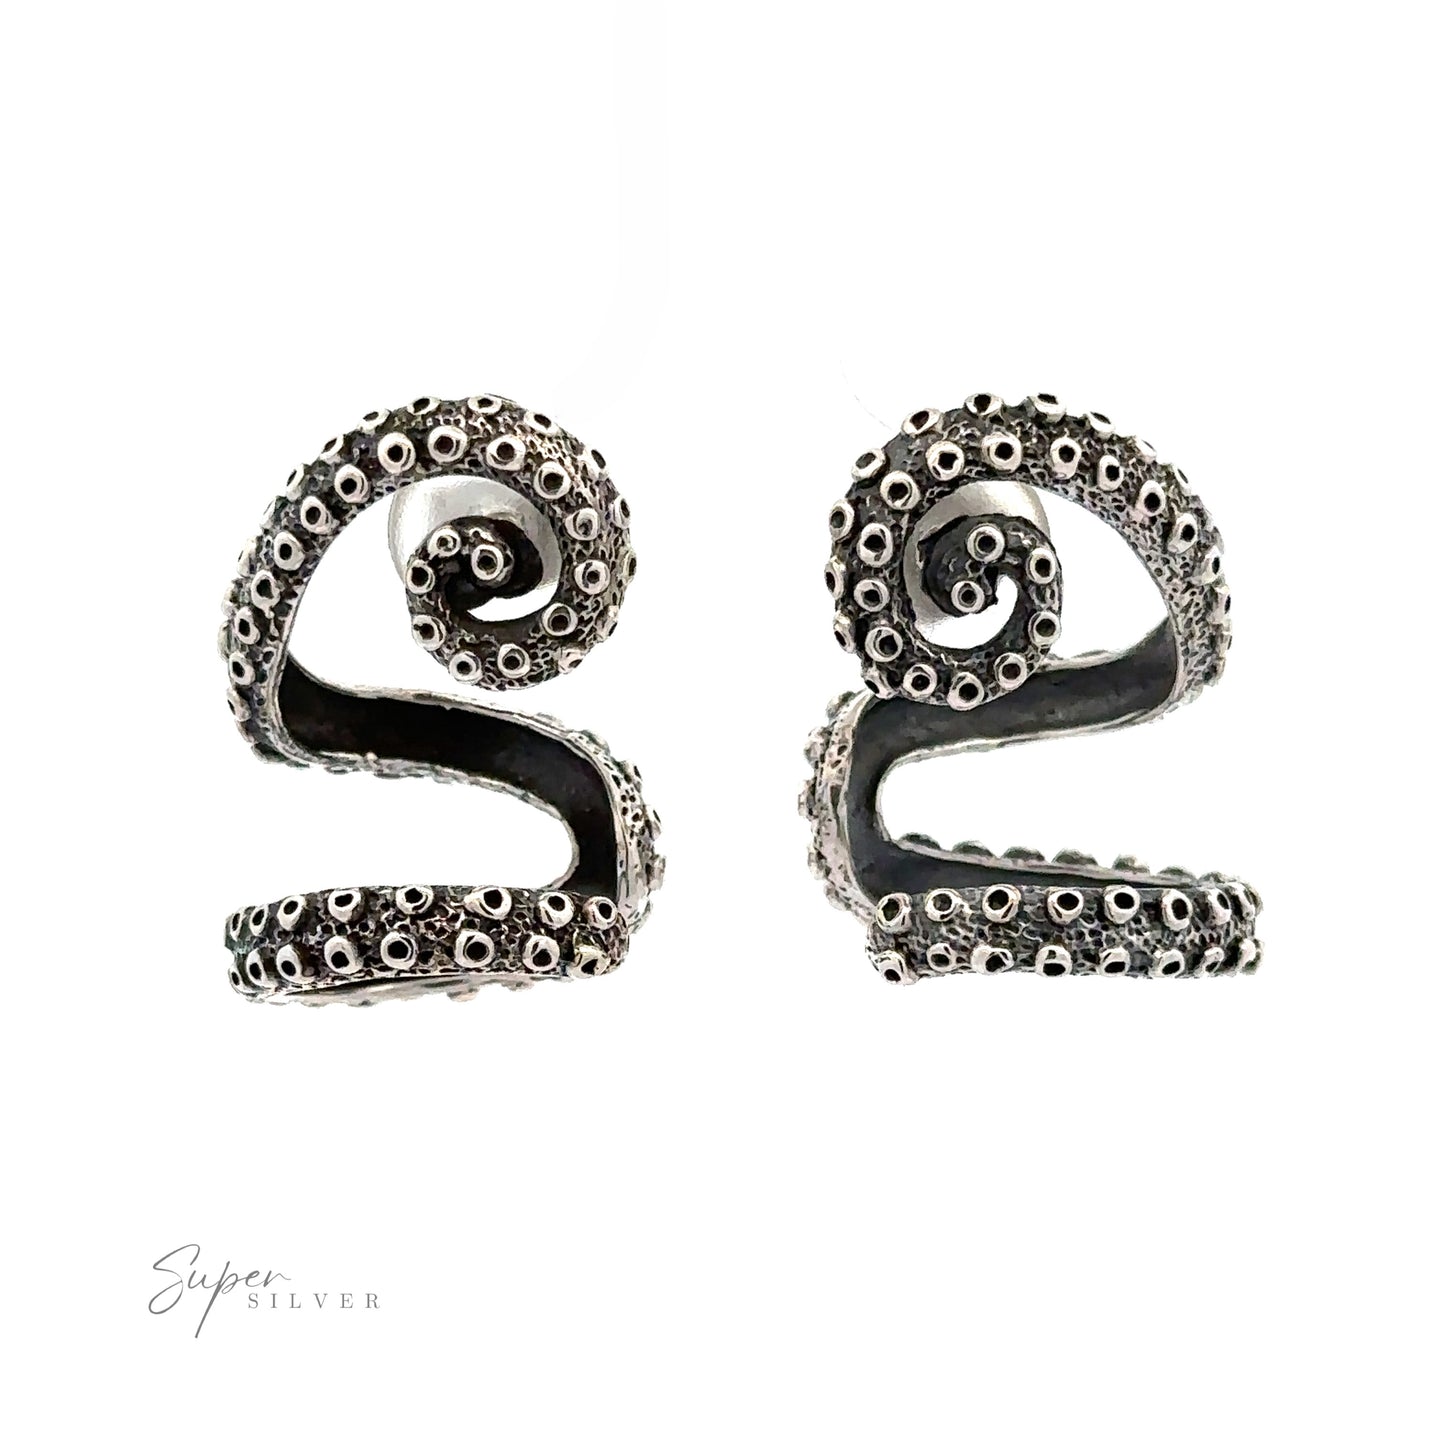 A pair of handcrafted sterling silver earrings designed to resemble octopus tentacles, featuring intricate details and a spiral shape. The logo "Super Silver" is visible in the lower left corner. These Curled Tentacle Earrings perfectly capture the essence of ocean allure jewelry.